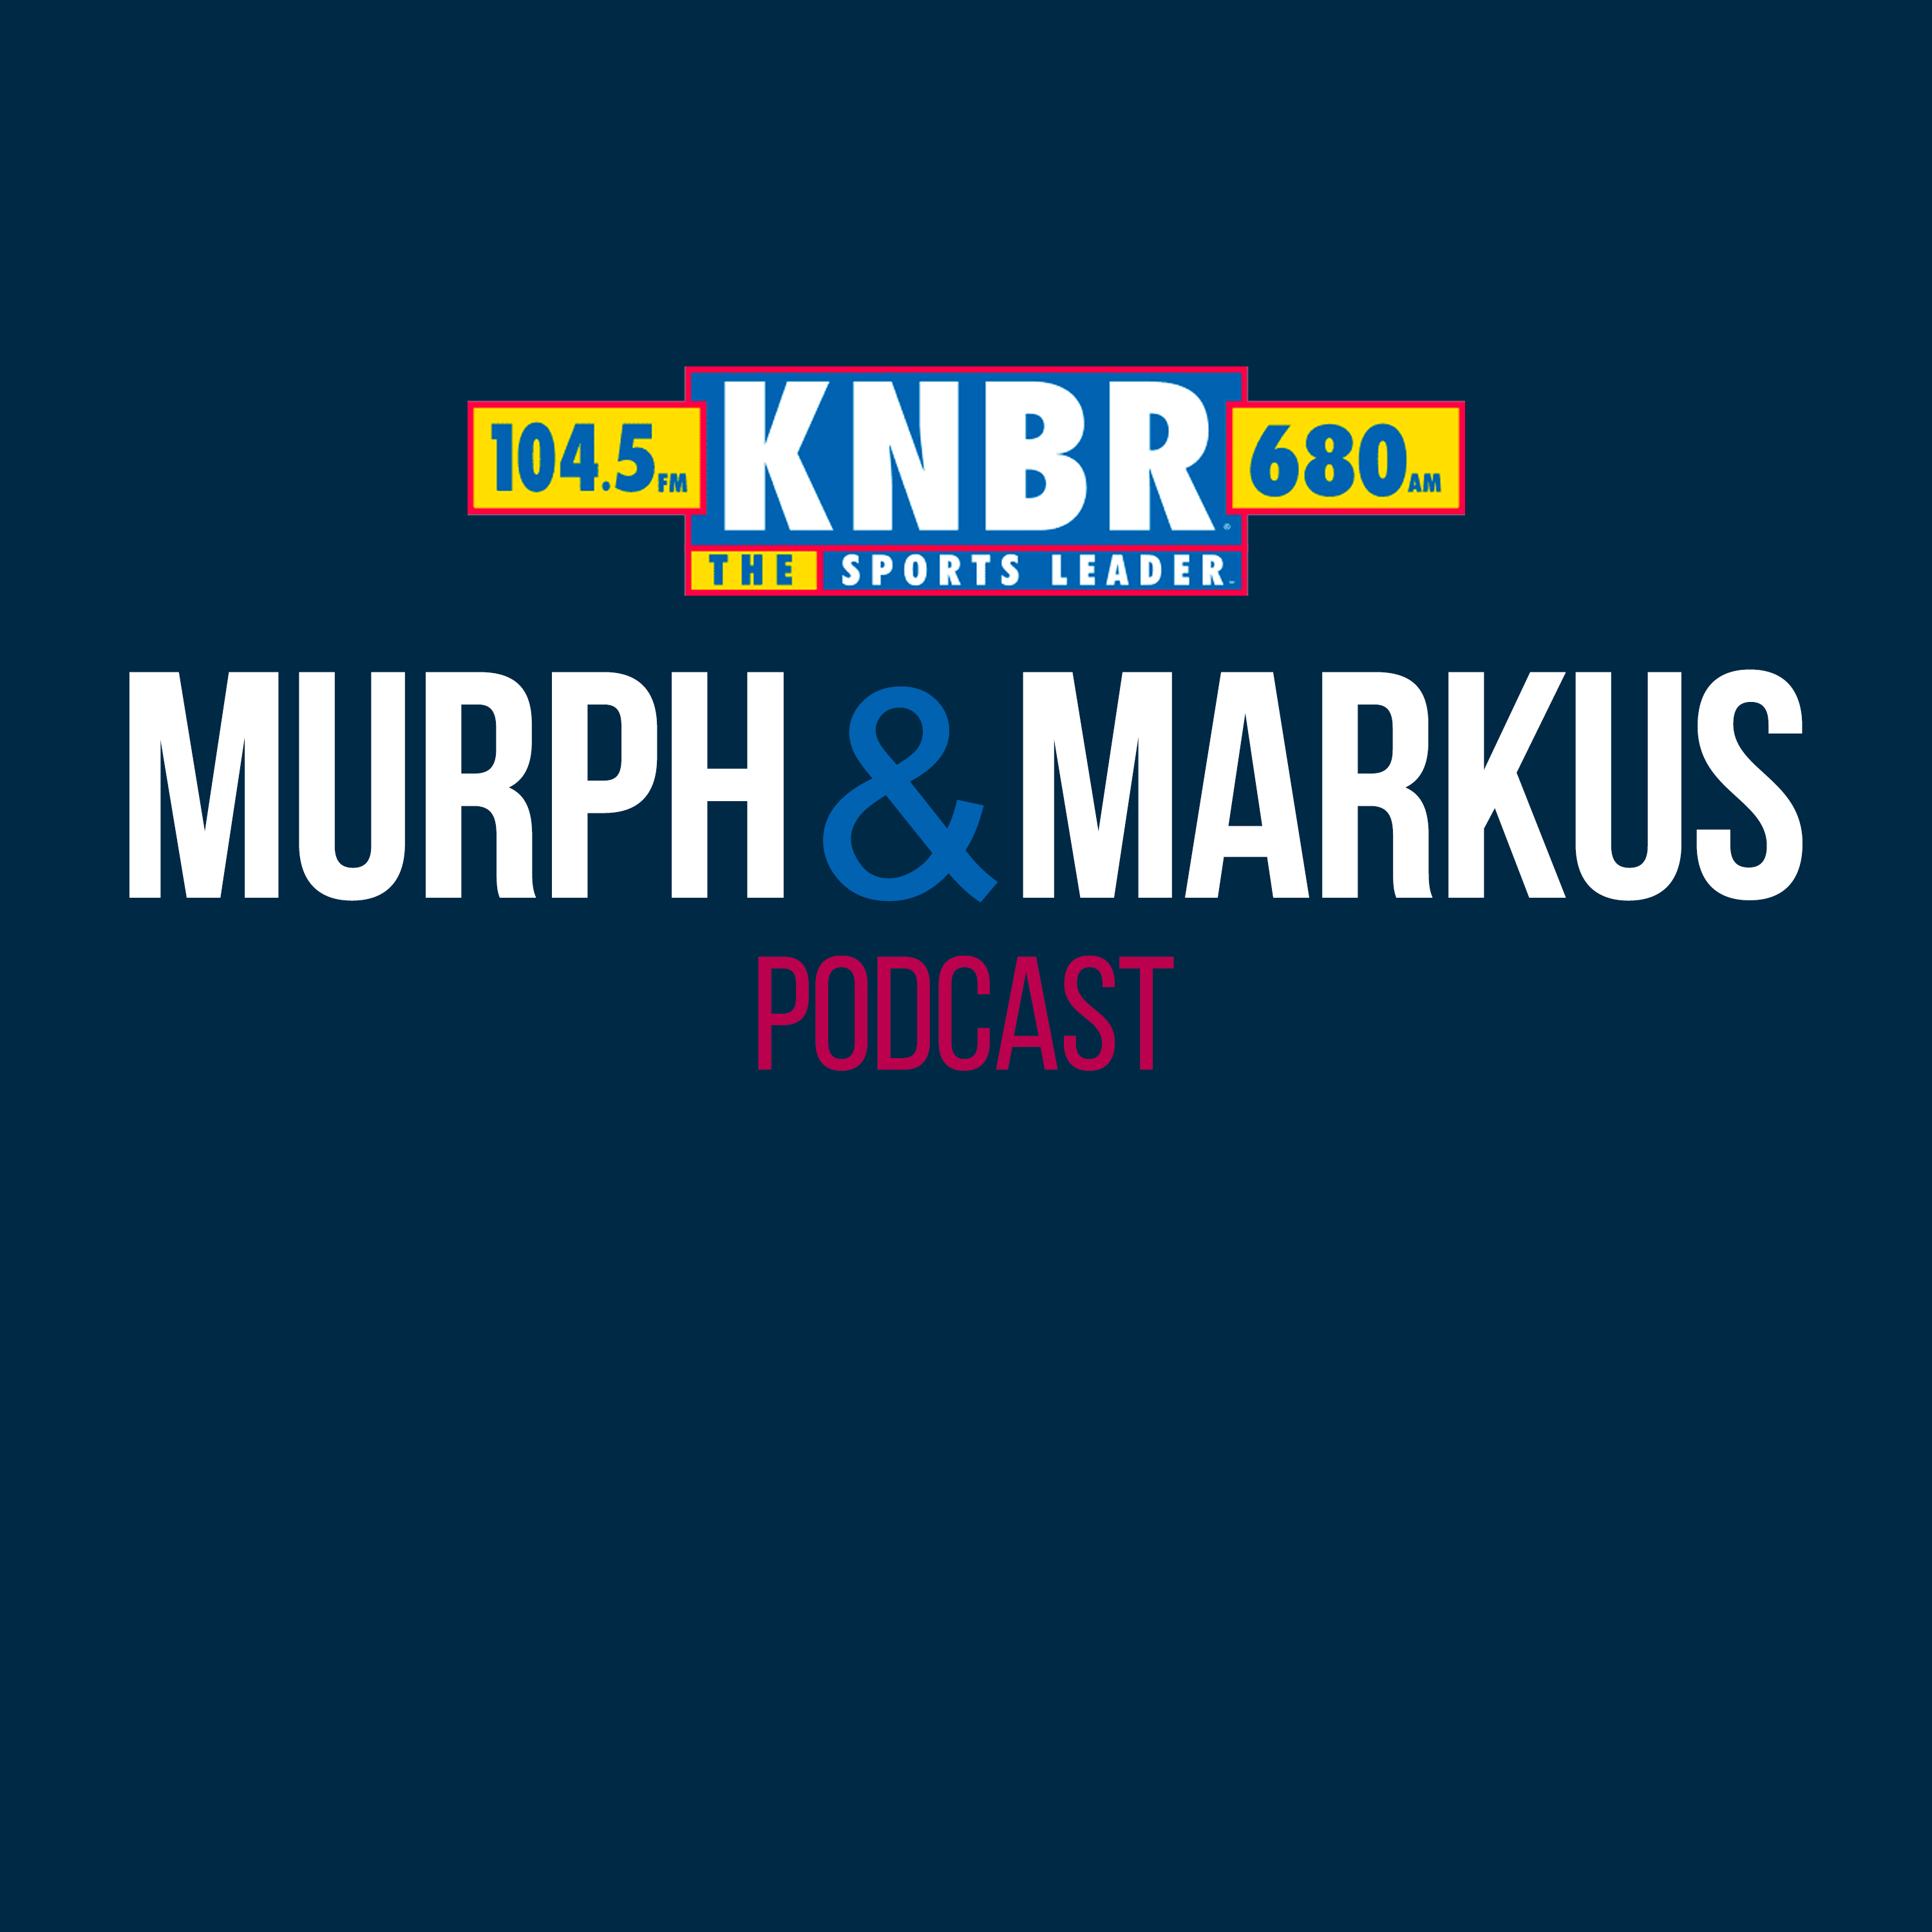 5-17 Hour 1: Murph & Markus react to the news about Scottie Scheffler, breakdown exactly what happened outside of Valhalla GC, and share their thoughts on some of Farhan Zaidi's comments from yesterday